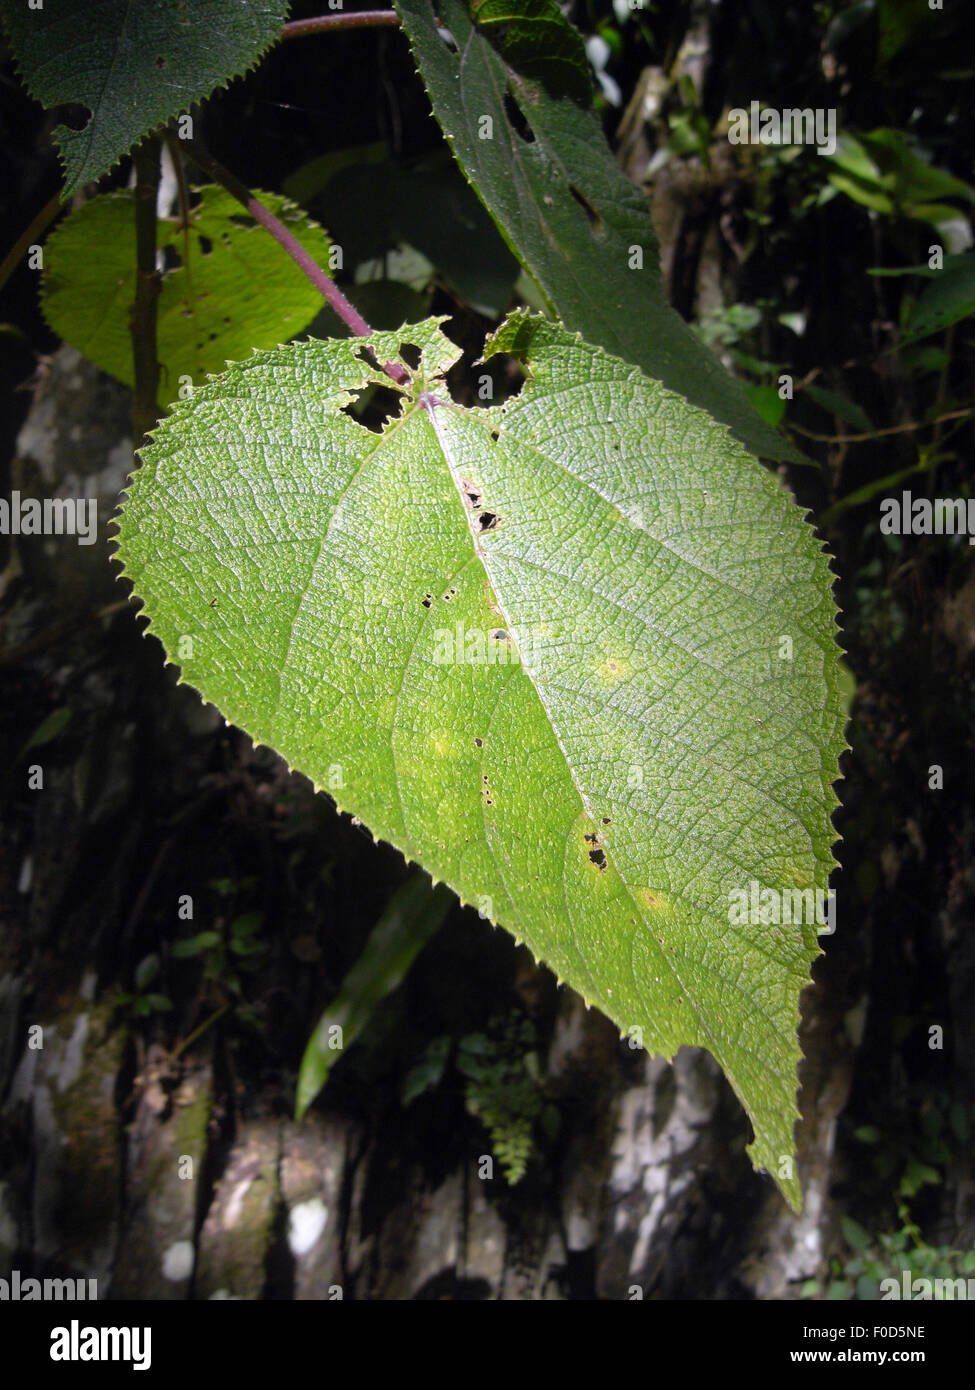 Leaf of stinging tree, Dendrocnide moroides, in the rainforest near Cairns, Queensland, Australia Stock Photo